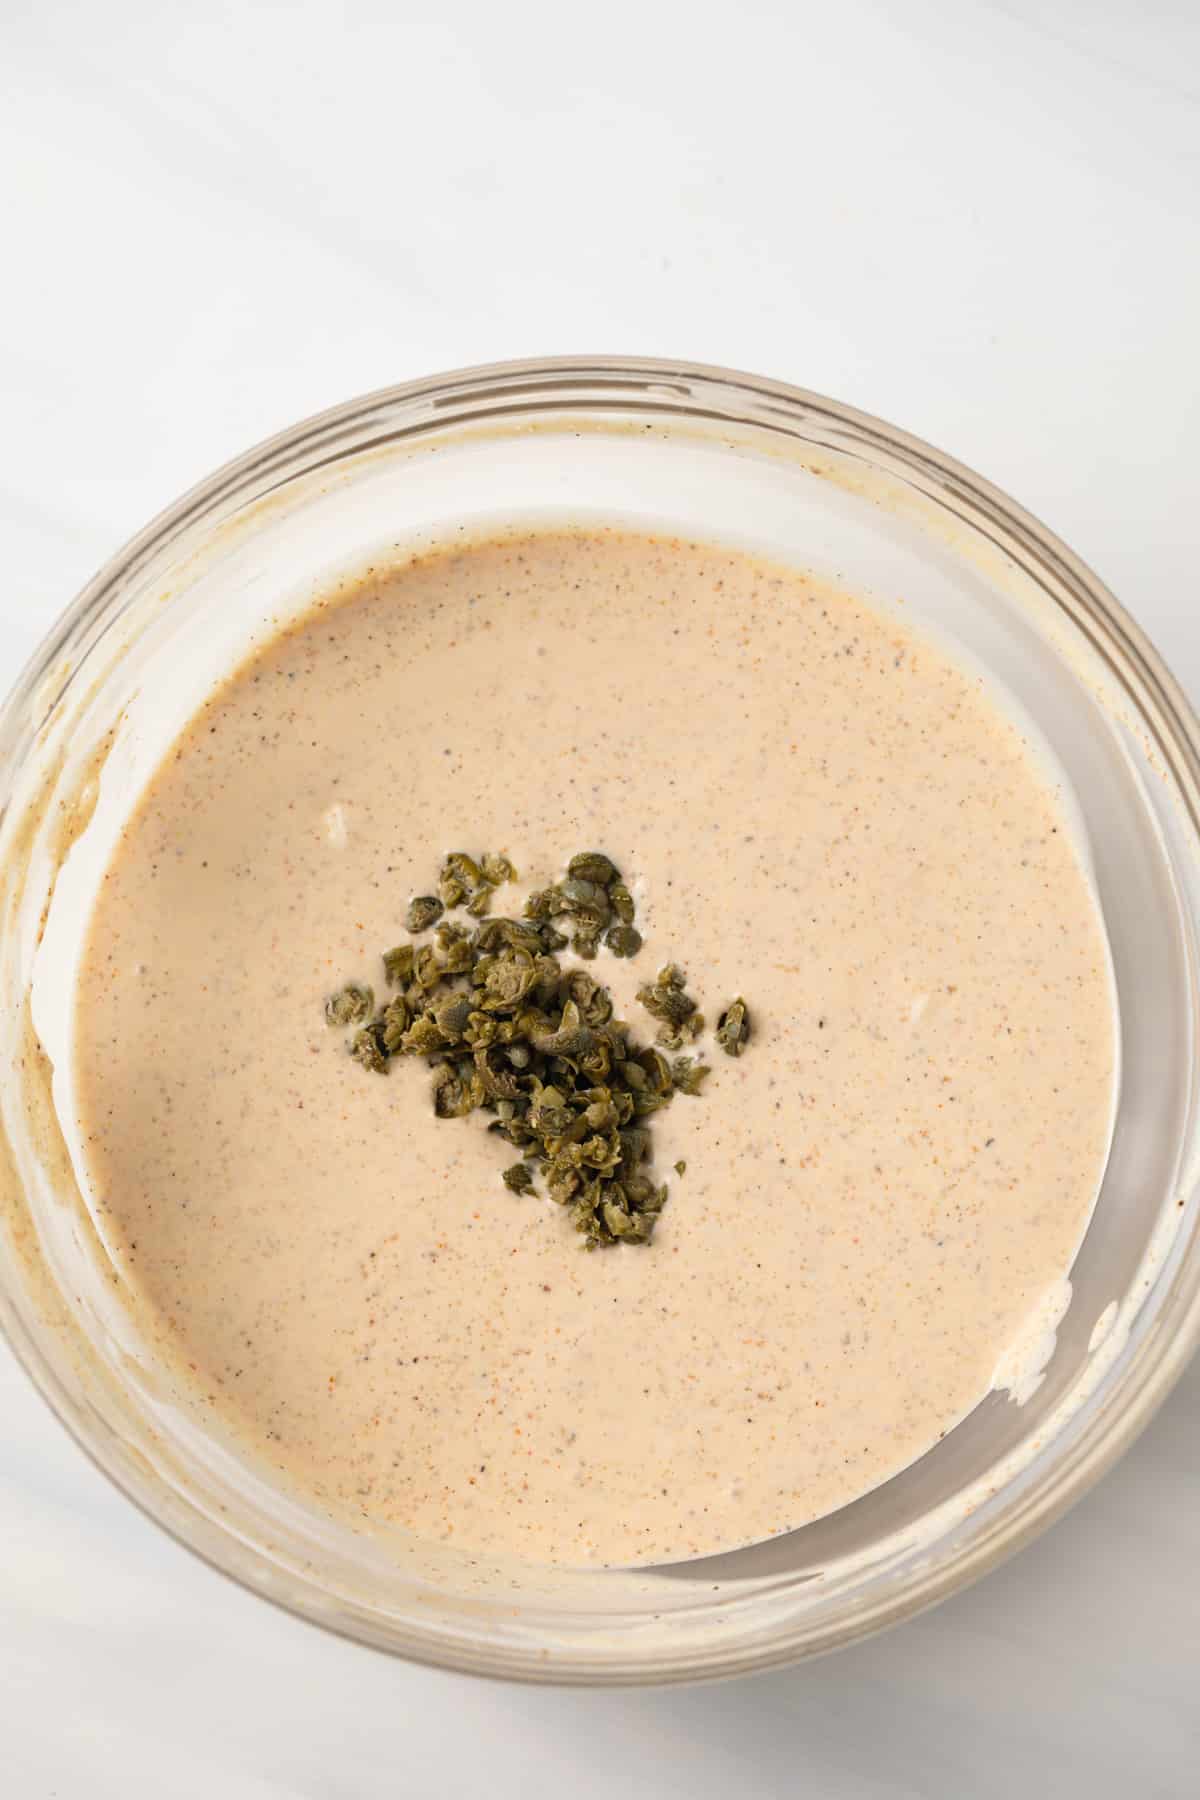 Capers added to remoulade sauce.